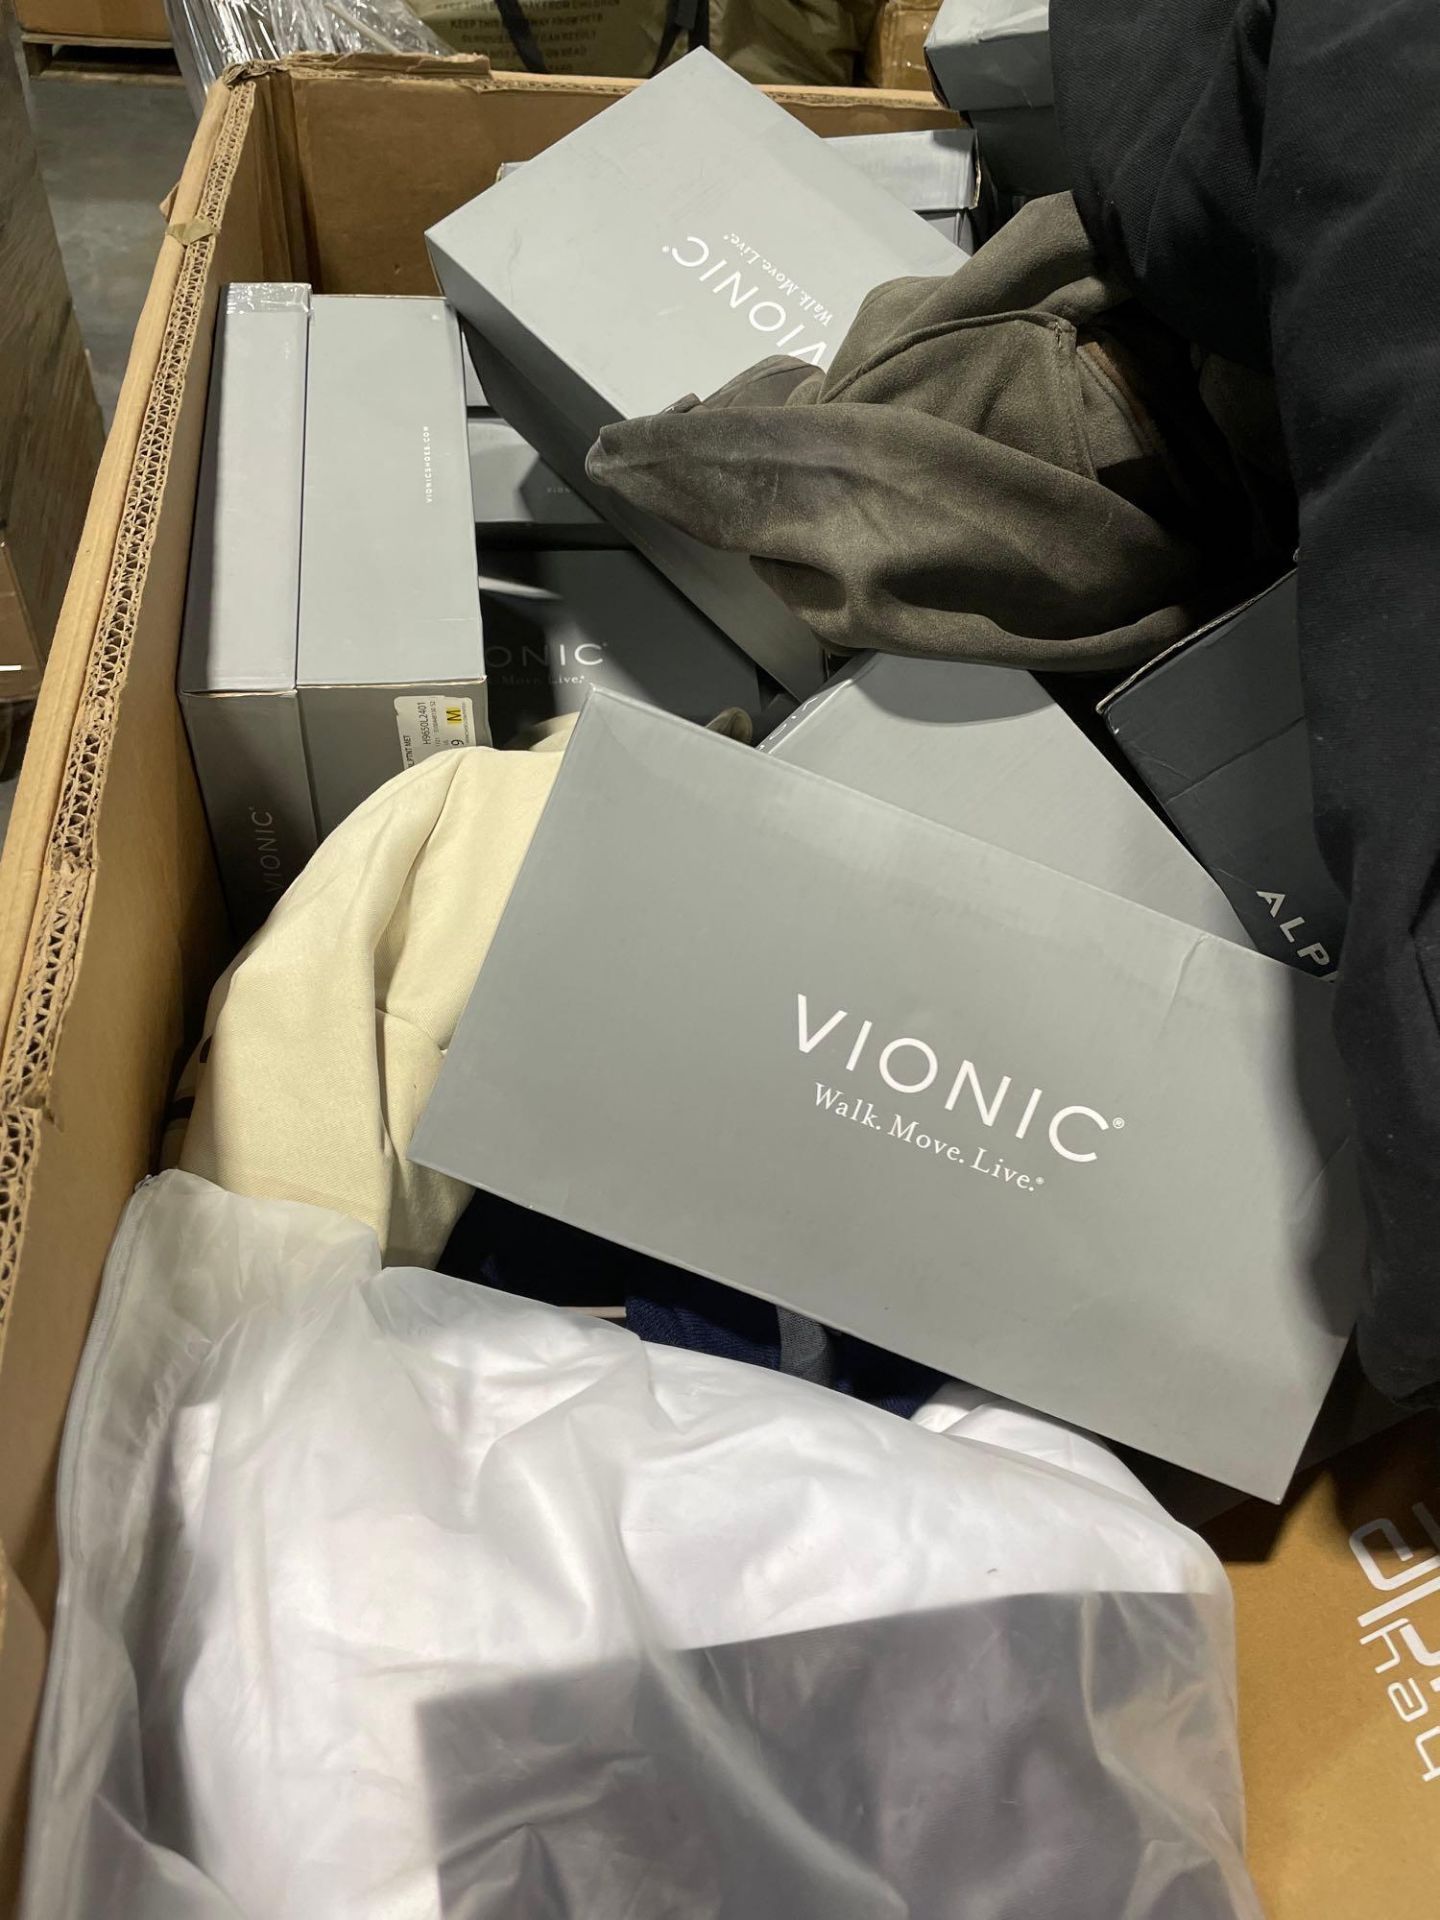 vionic slippers and clothing - Image 3 of 11